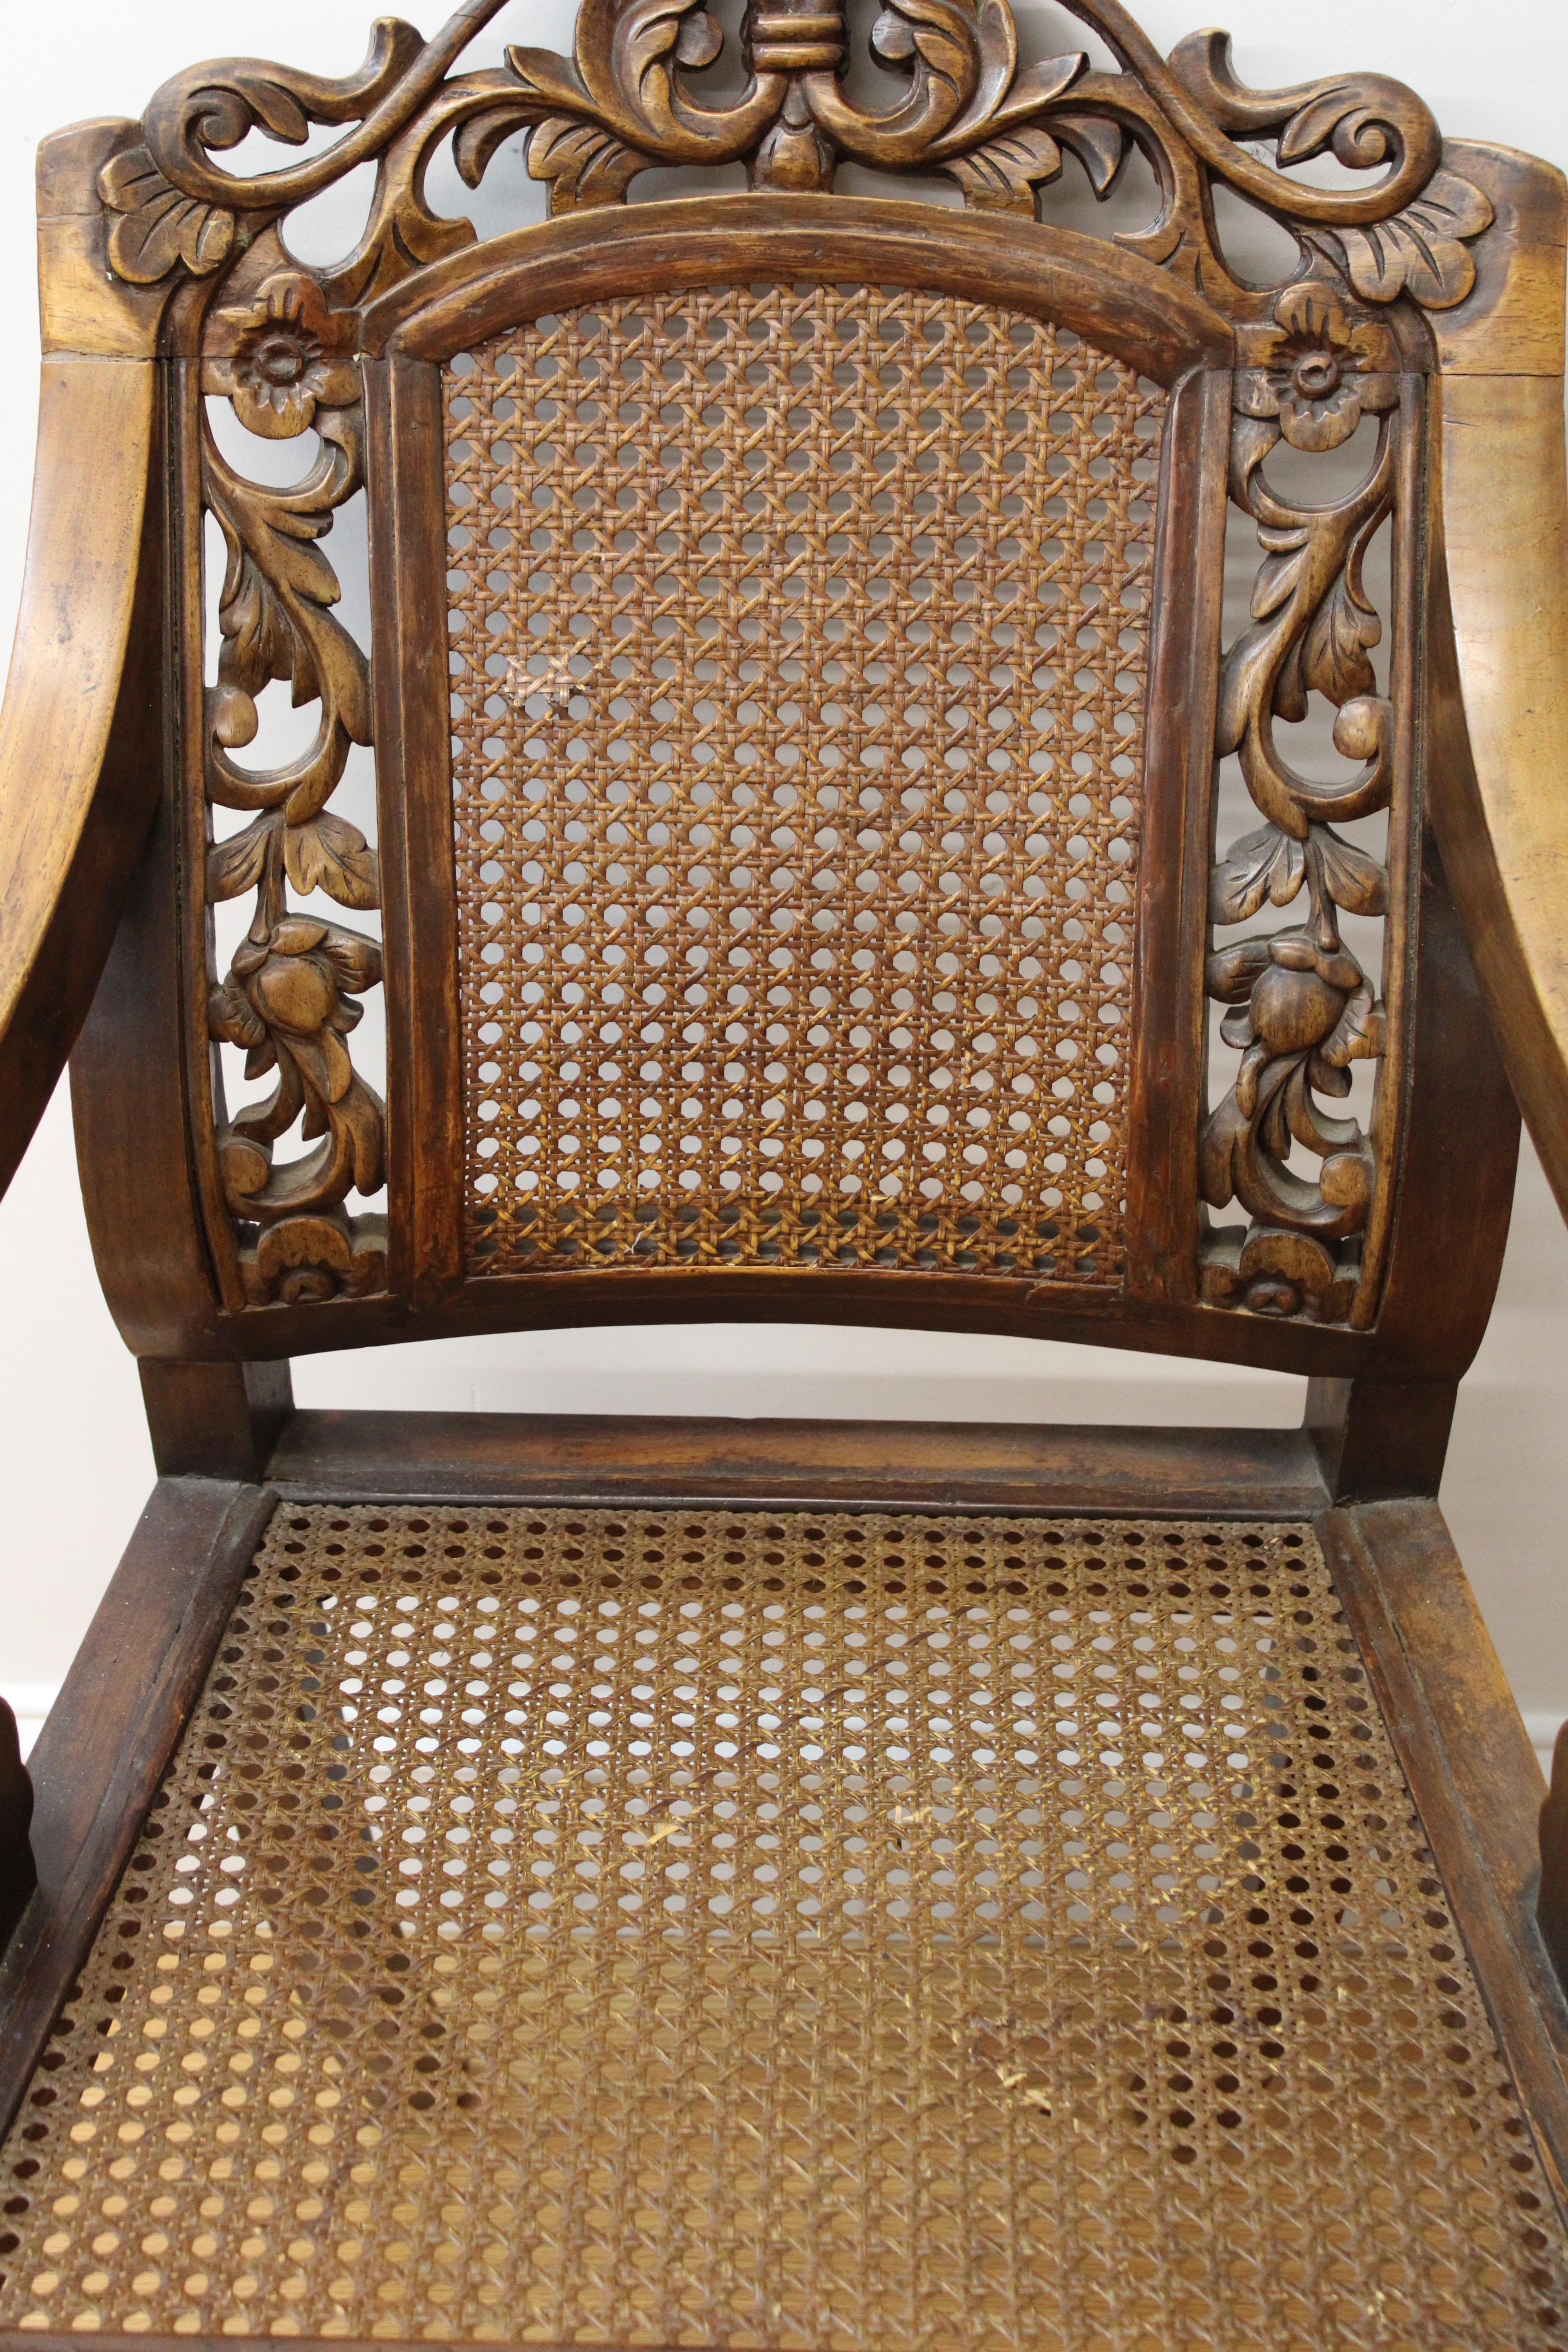 C. 20th century

Pair of caned & carved wood arm chairs, beautifully hand carved floral scroll design on backs.